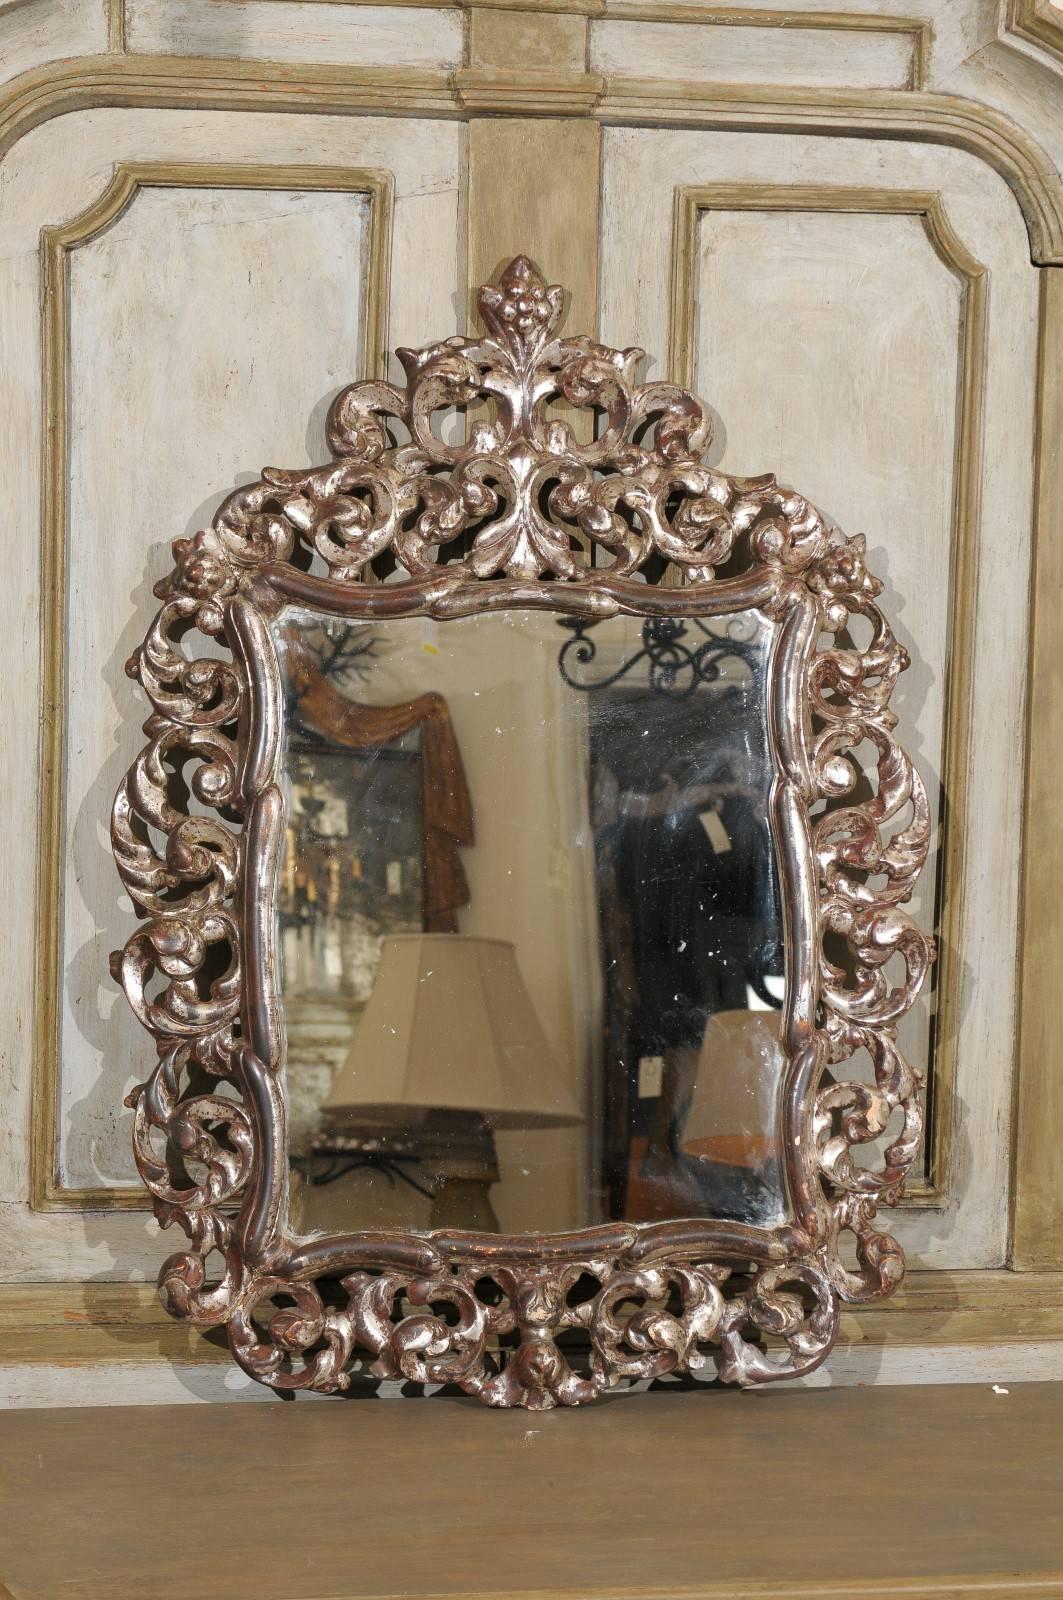 A beautifully carved Italian mirror from the early 20th century. This richly carved mirror is a warm bronze color with silver highlights throughout. This piece features ornate acanthus leafs and scrolls in the surround. At the crest of this piece